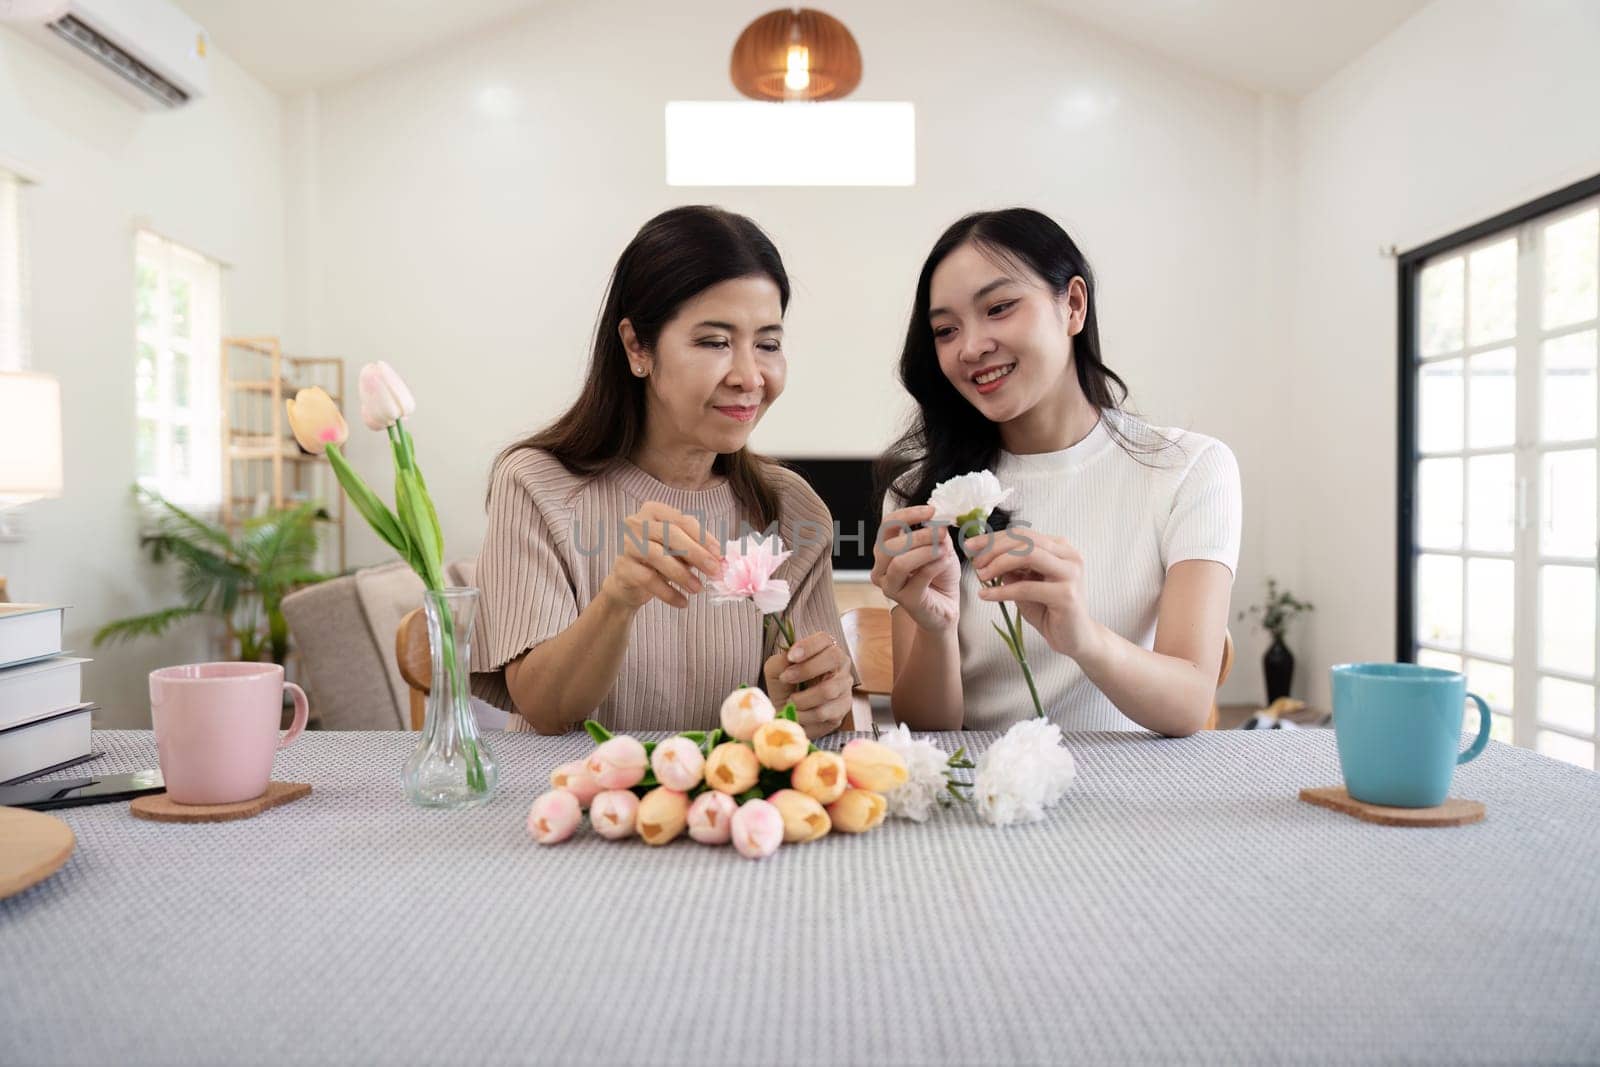 Happy mother and daughter arranging flower in vase at table in house do activities together on Mother's day.